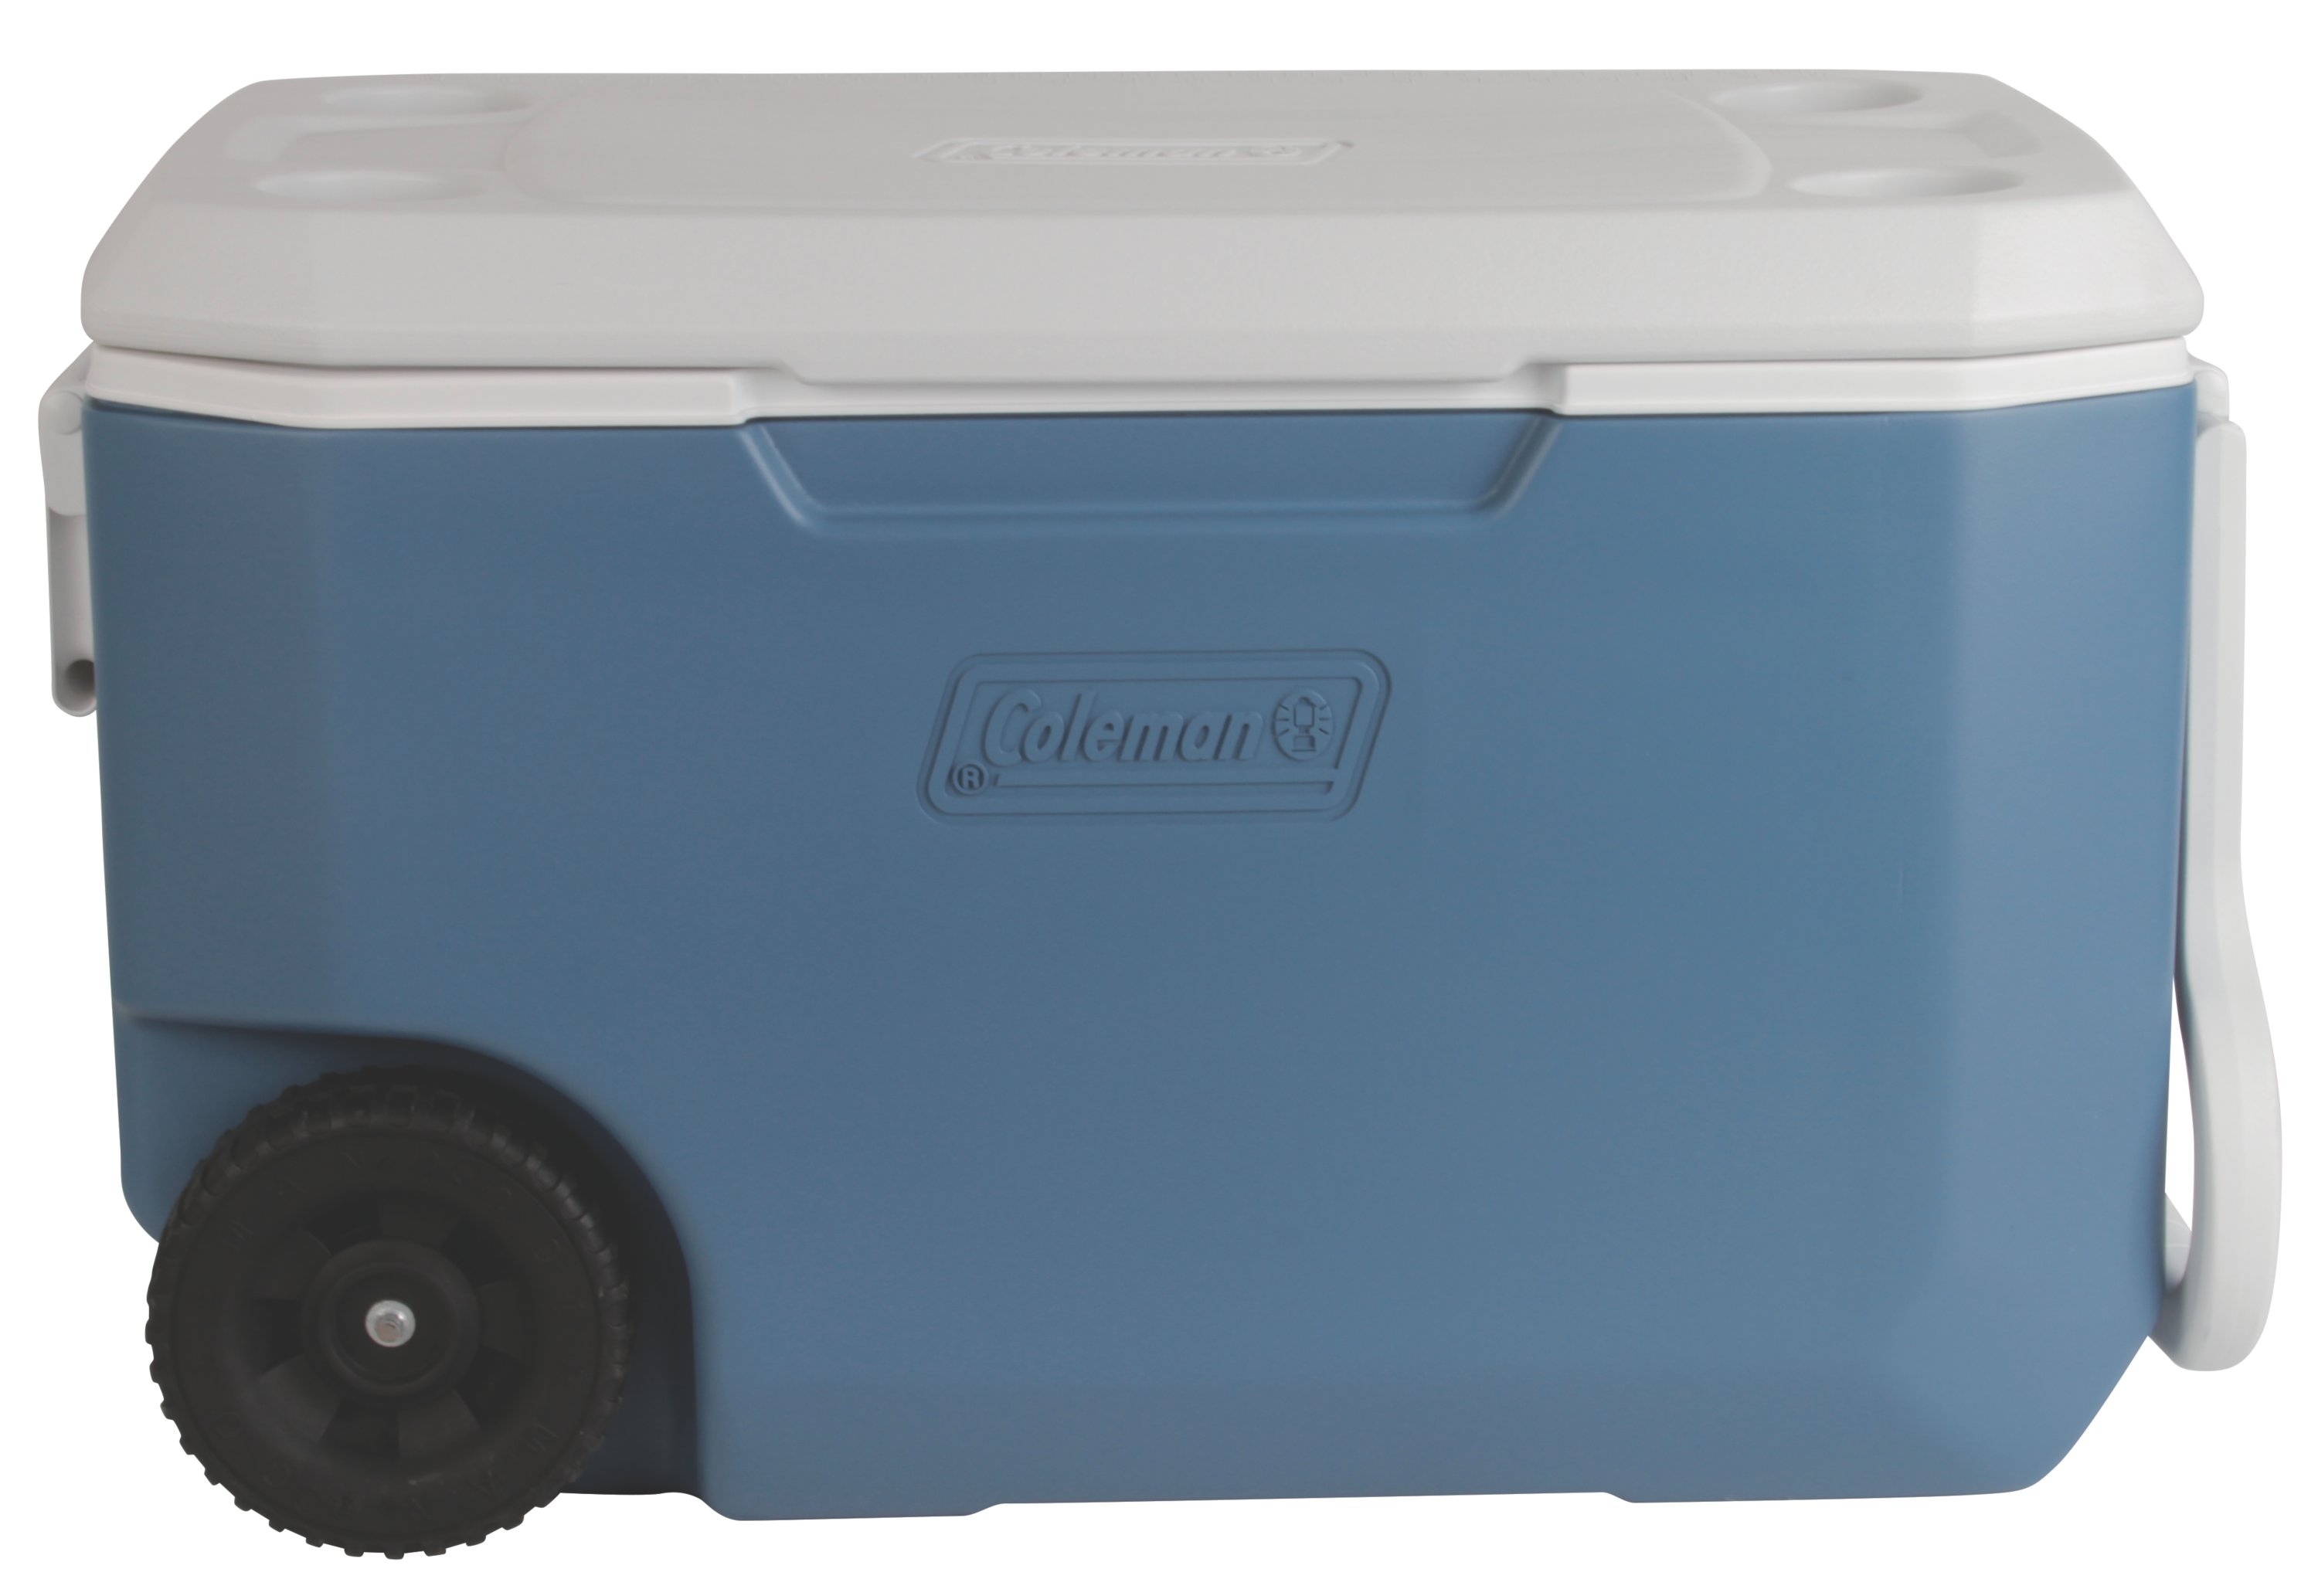 62-Quart Portable Ice Chest Cooler 3-Day Insulated Wheels Blue Camping Outdoor